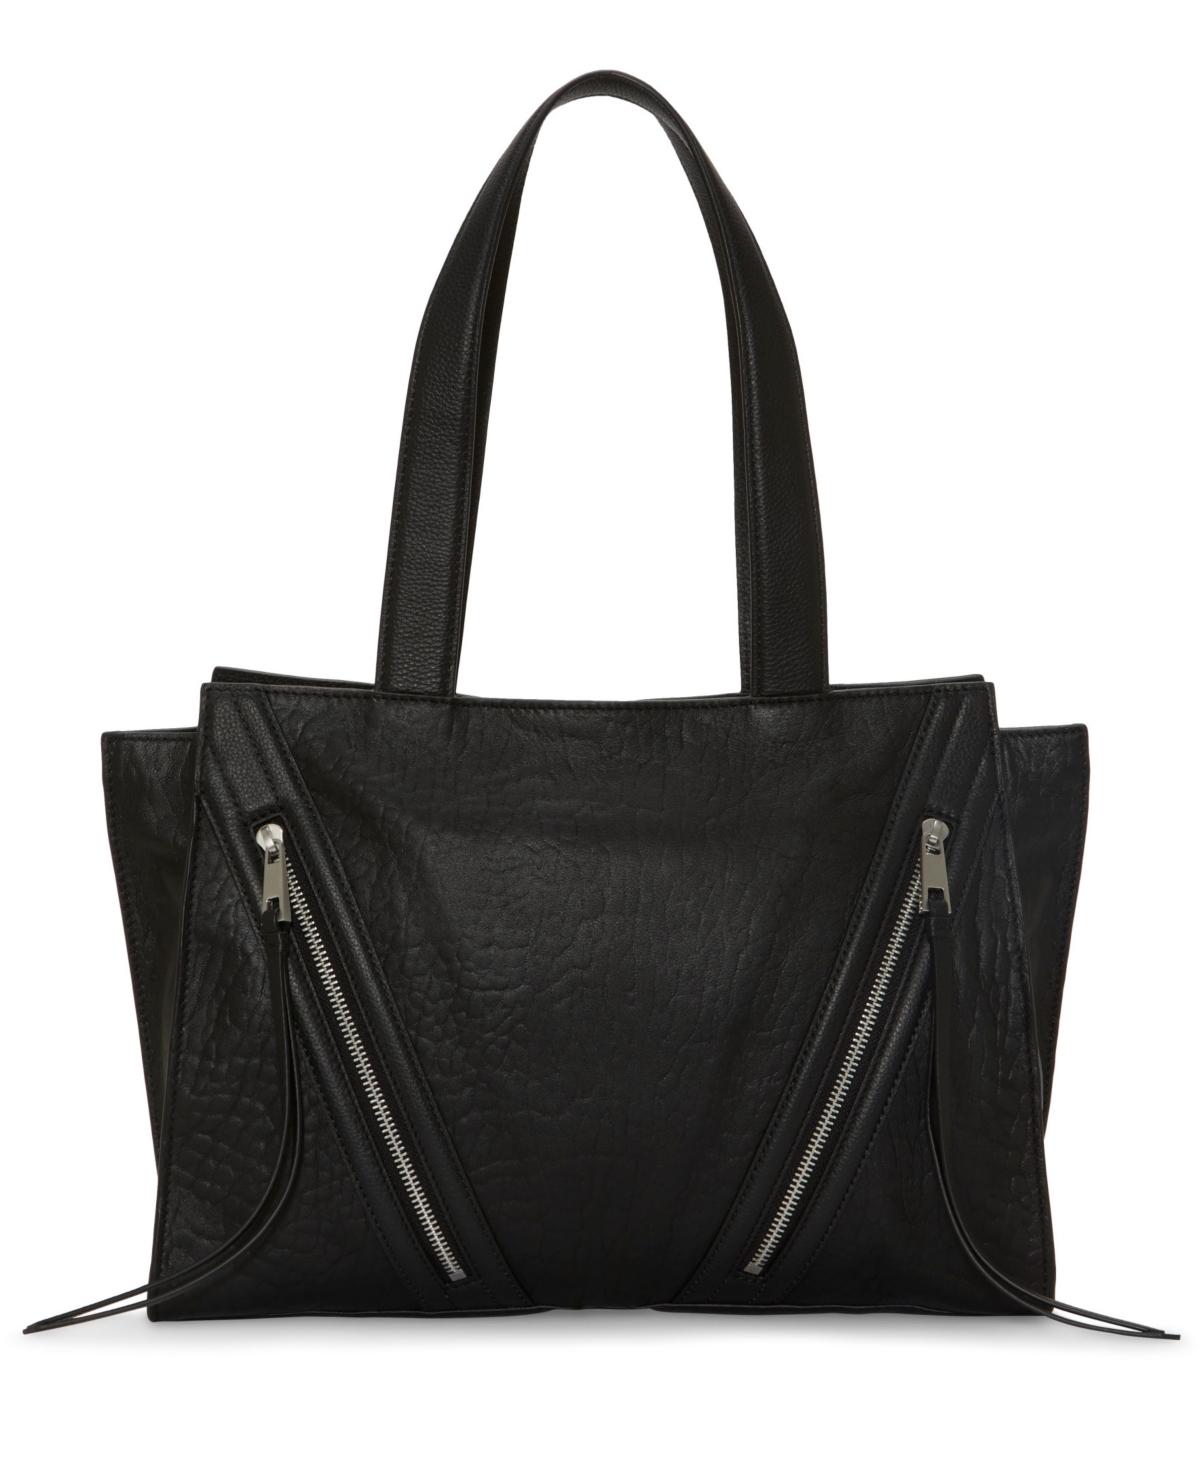 Vince Camuto Handbags On Sale Up To 90% Off Retail